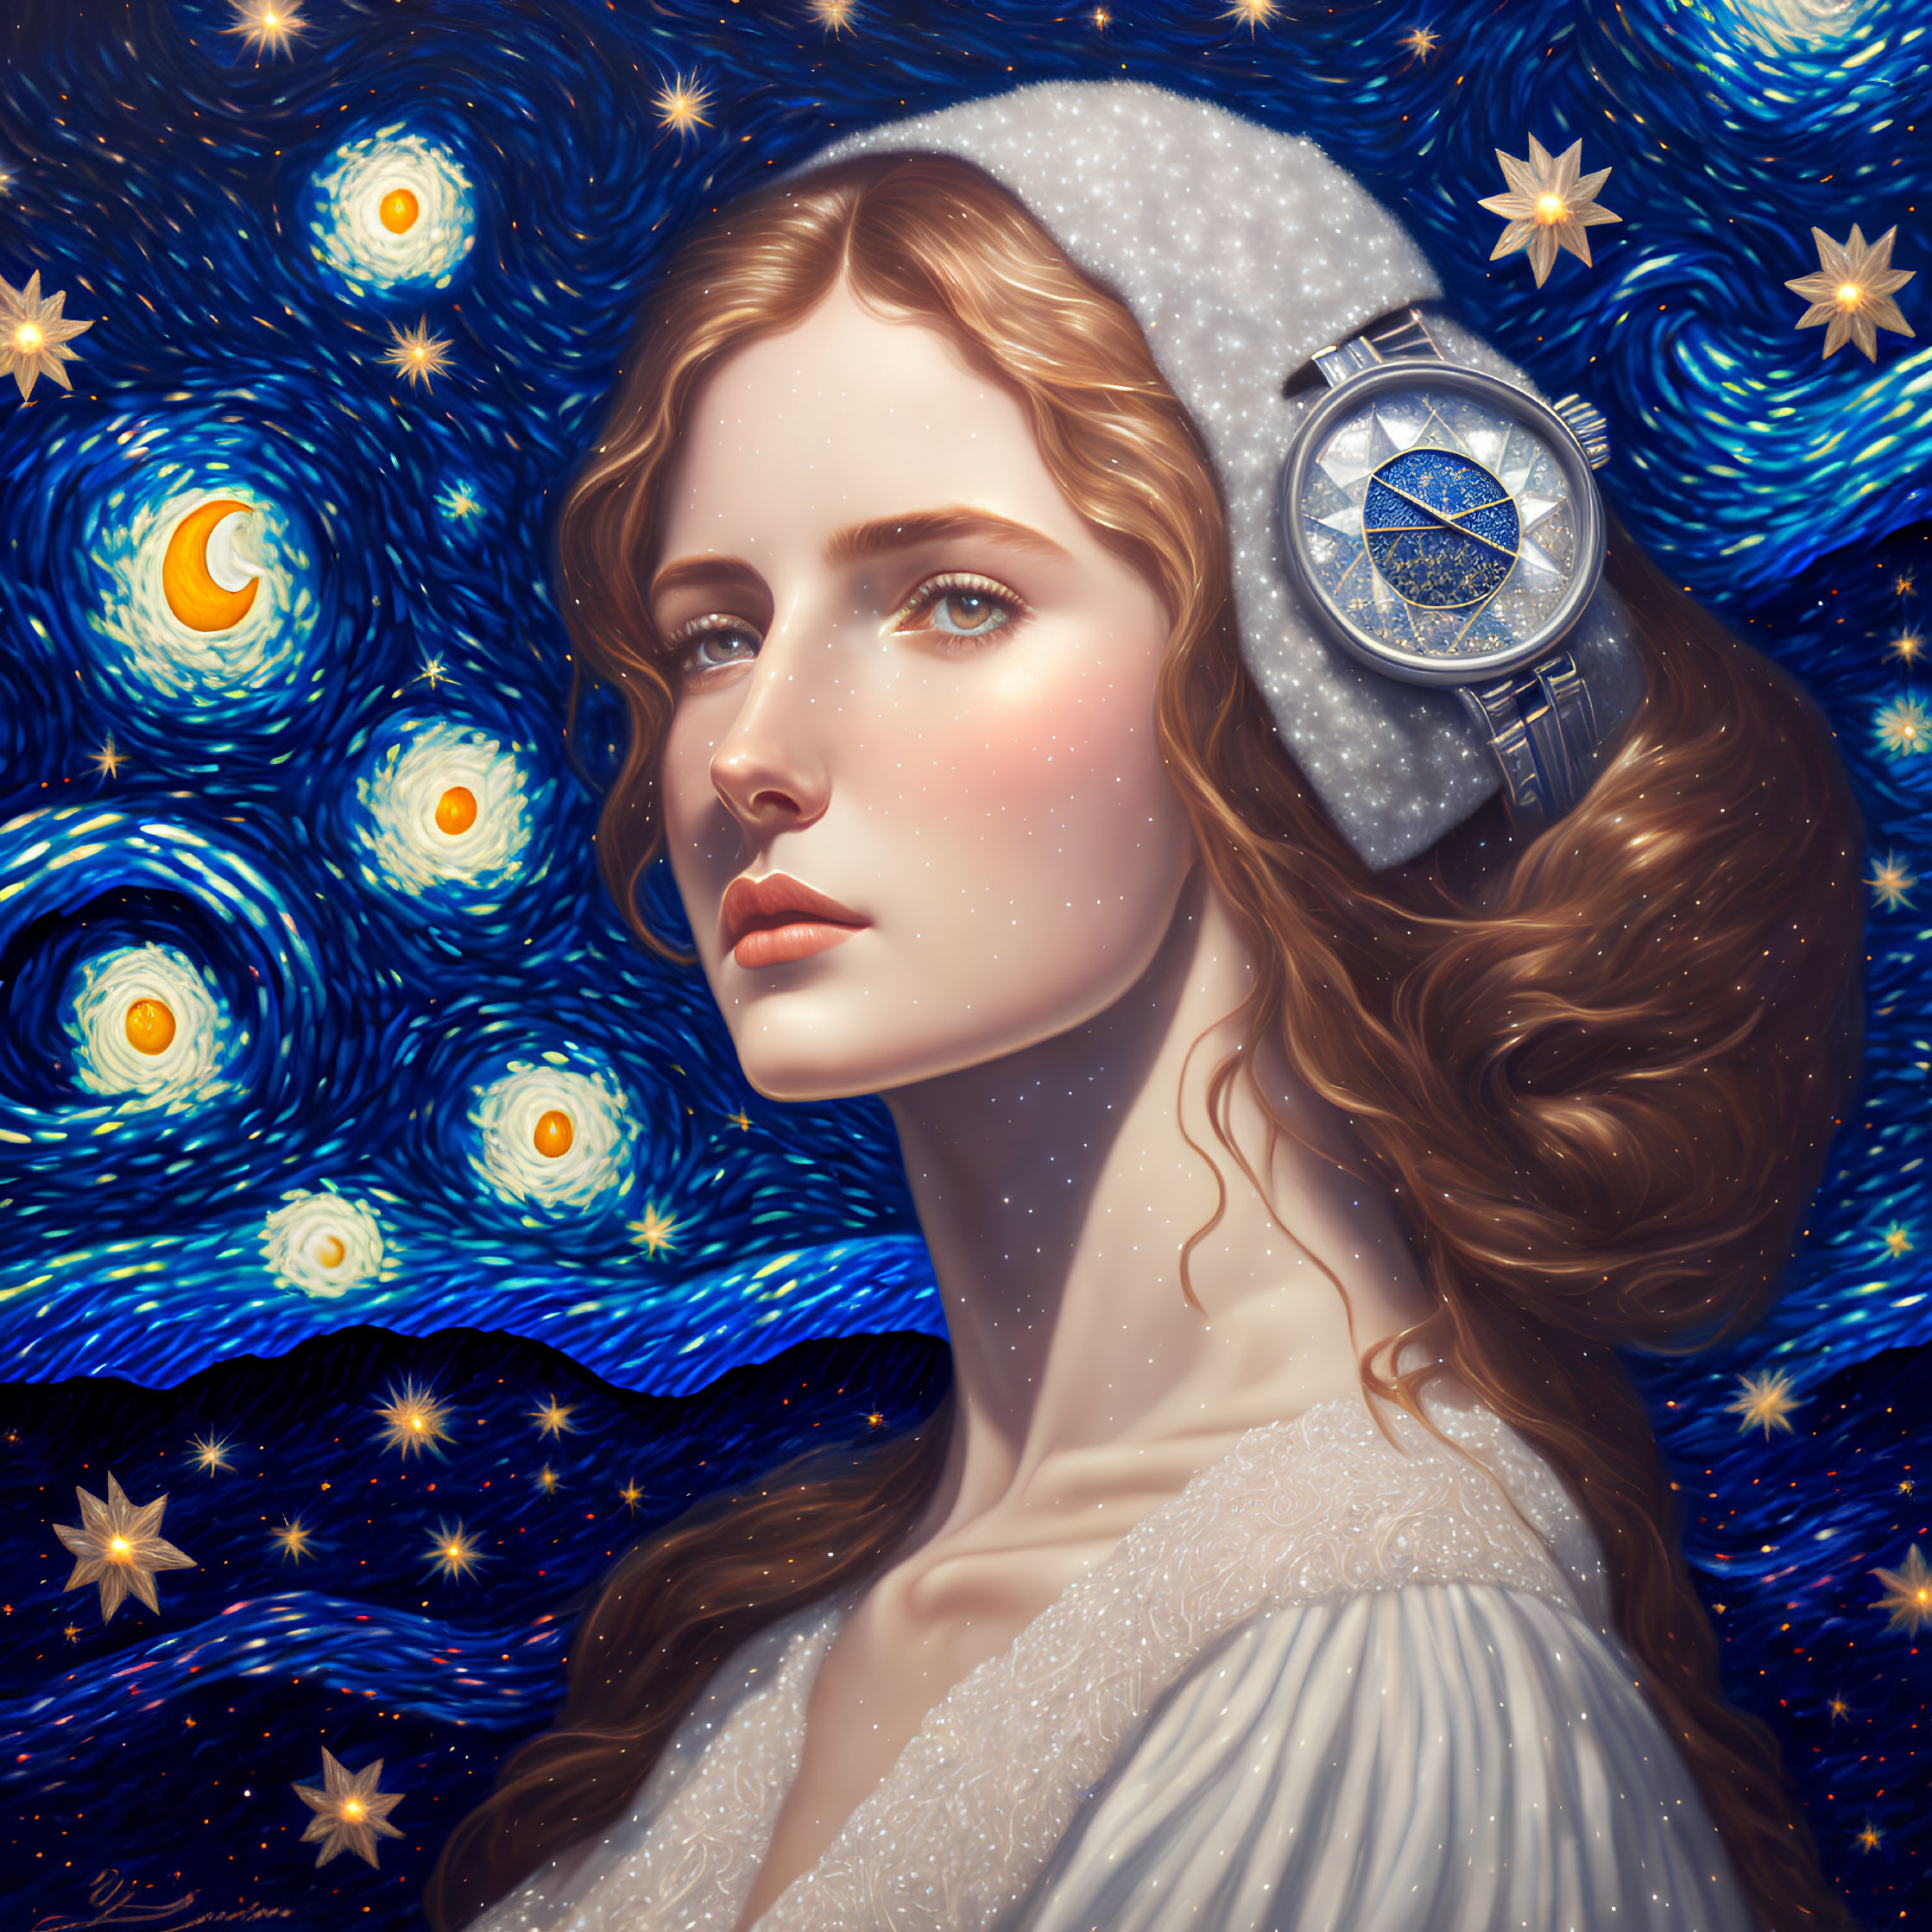 Stylized portrait of woman with starry headset in Van Gogh-inspired background